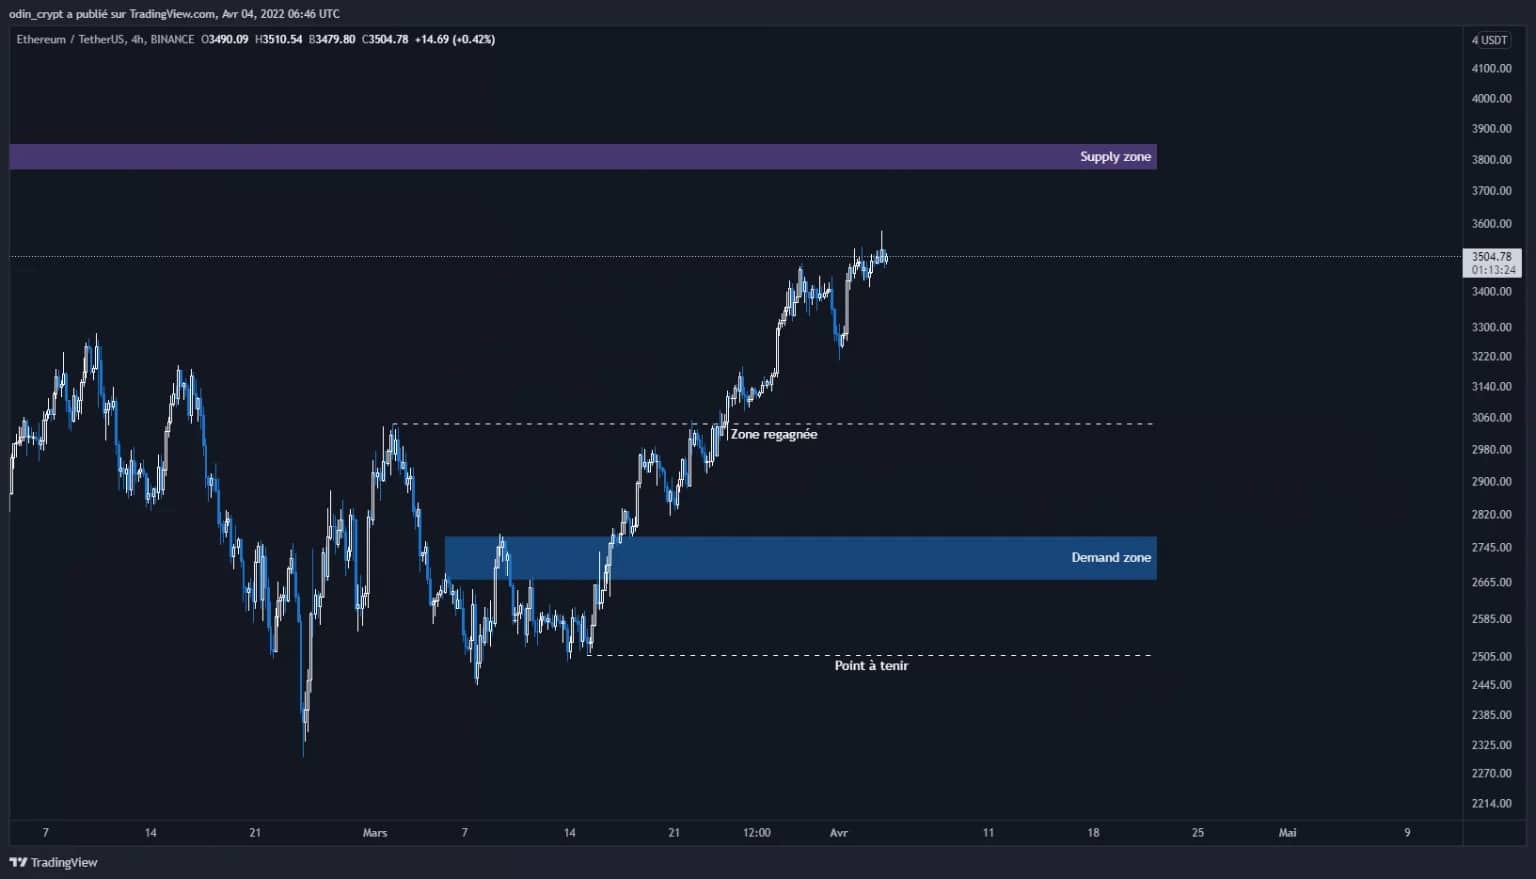 Ether (ETH) analysis in 4h